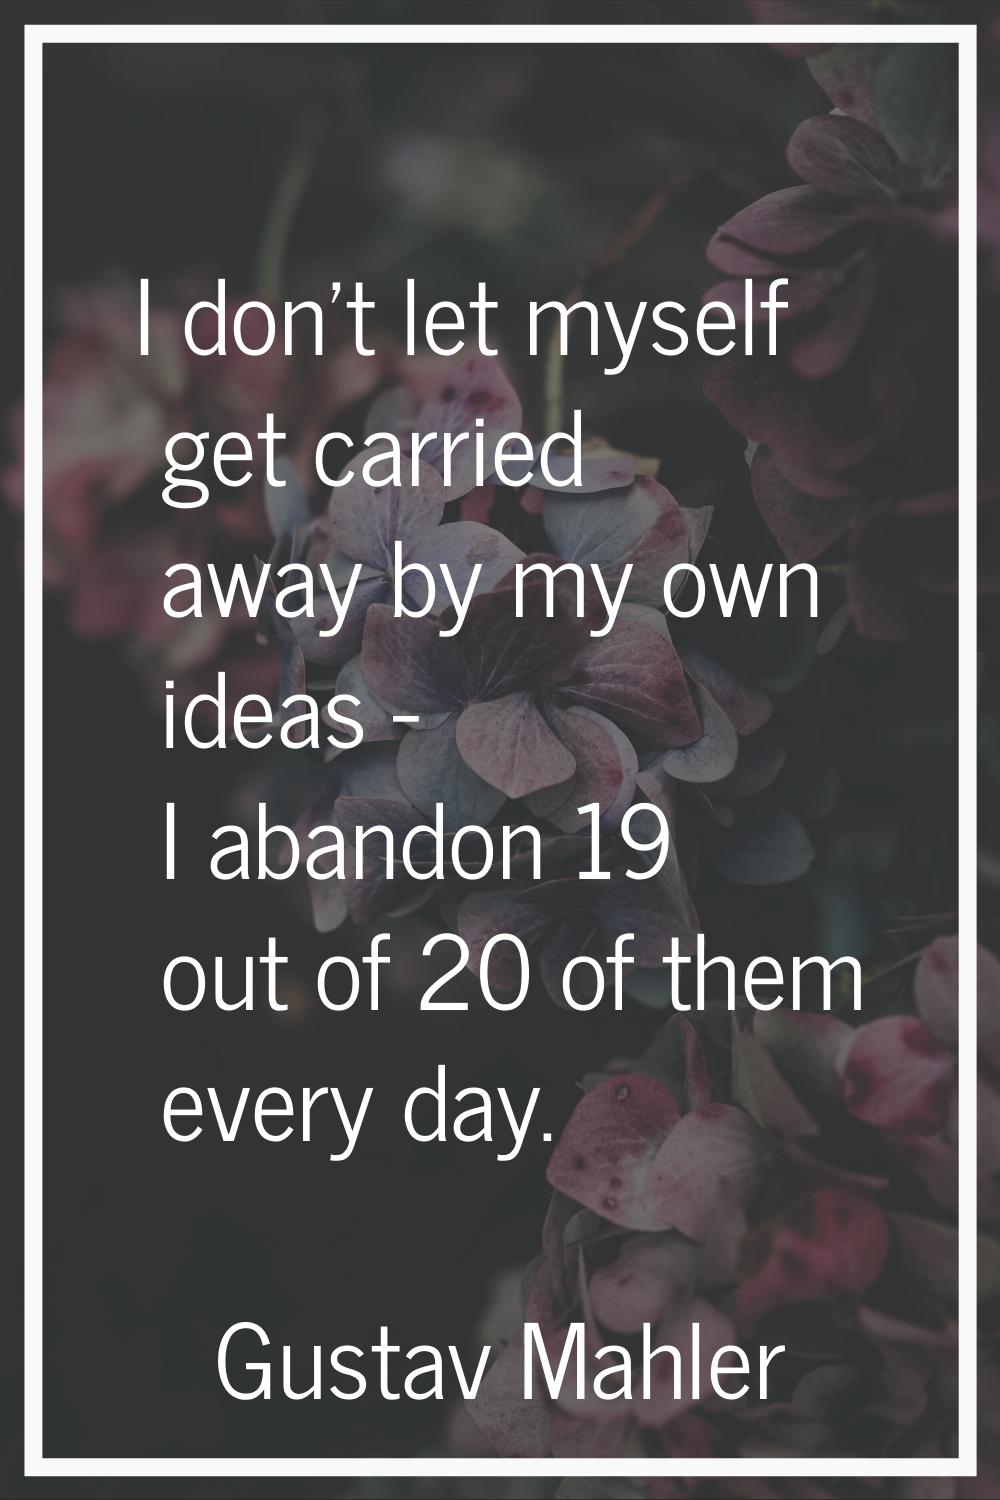 I don't let myself get carried away by my own ideas - I abandon 19 out of 20 of them every day.